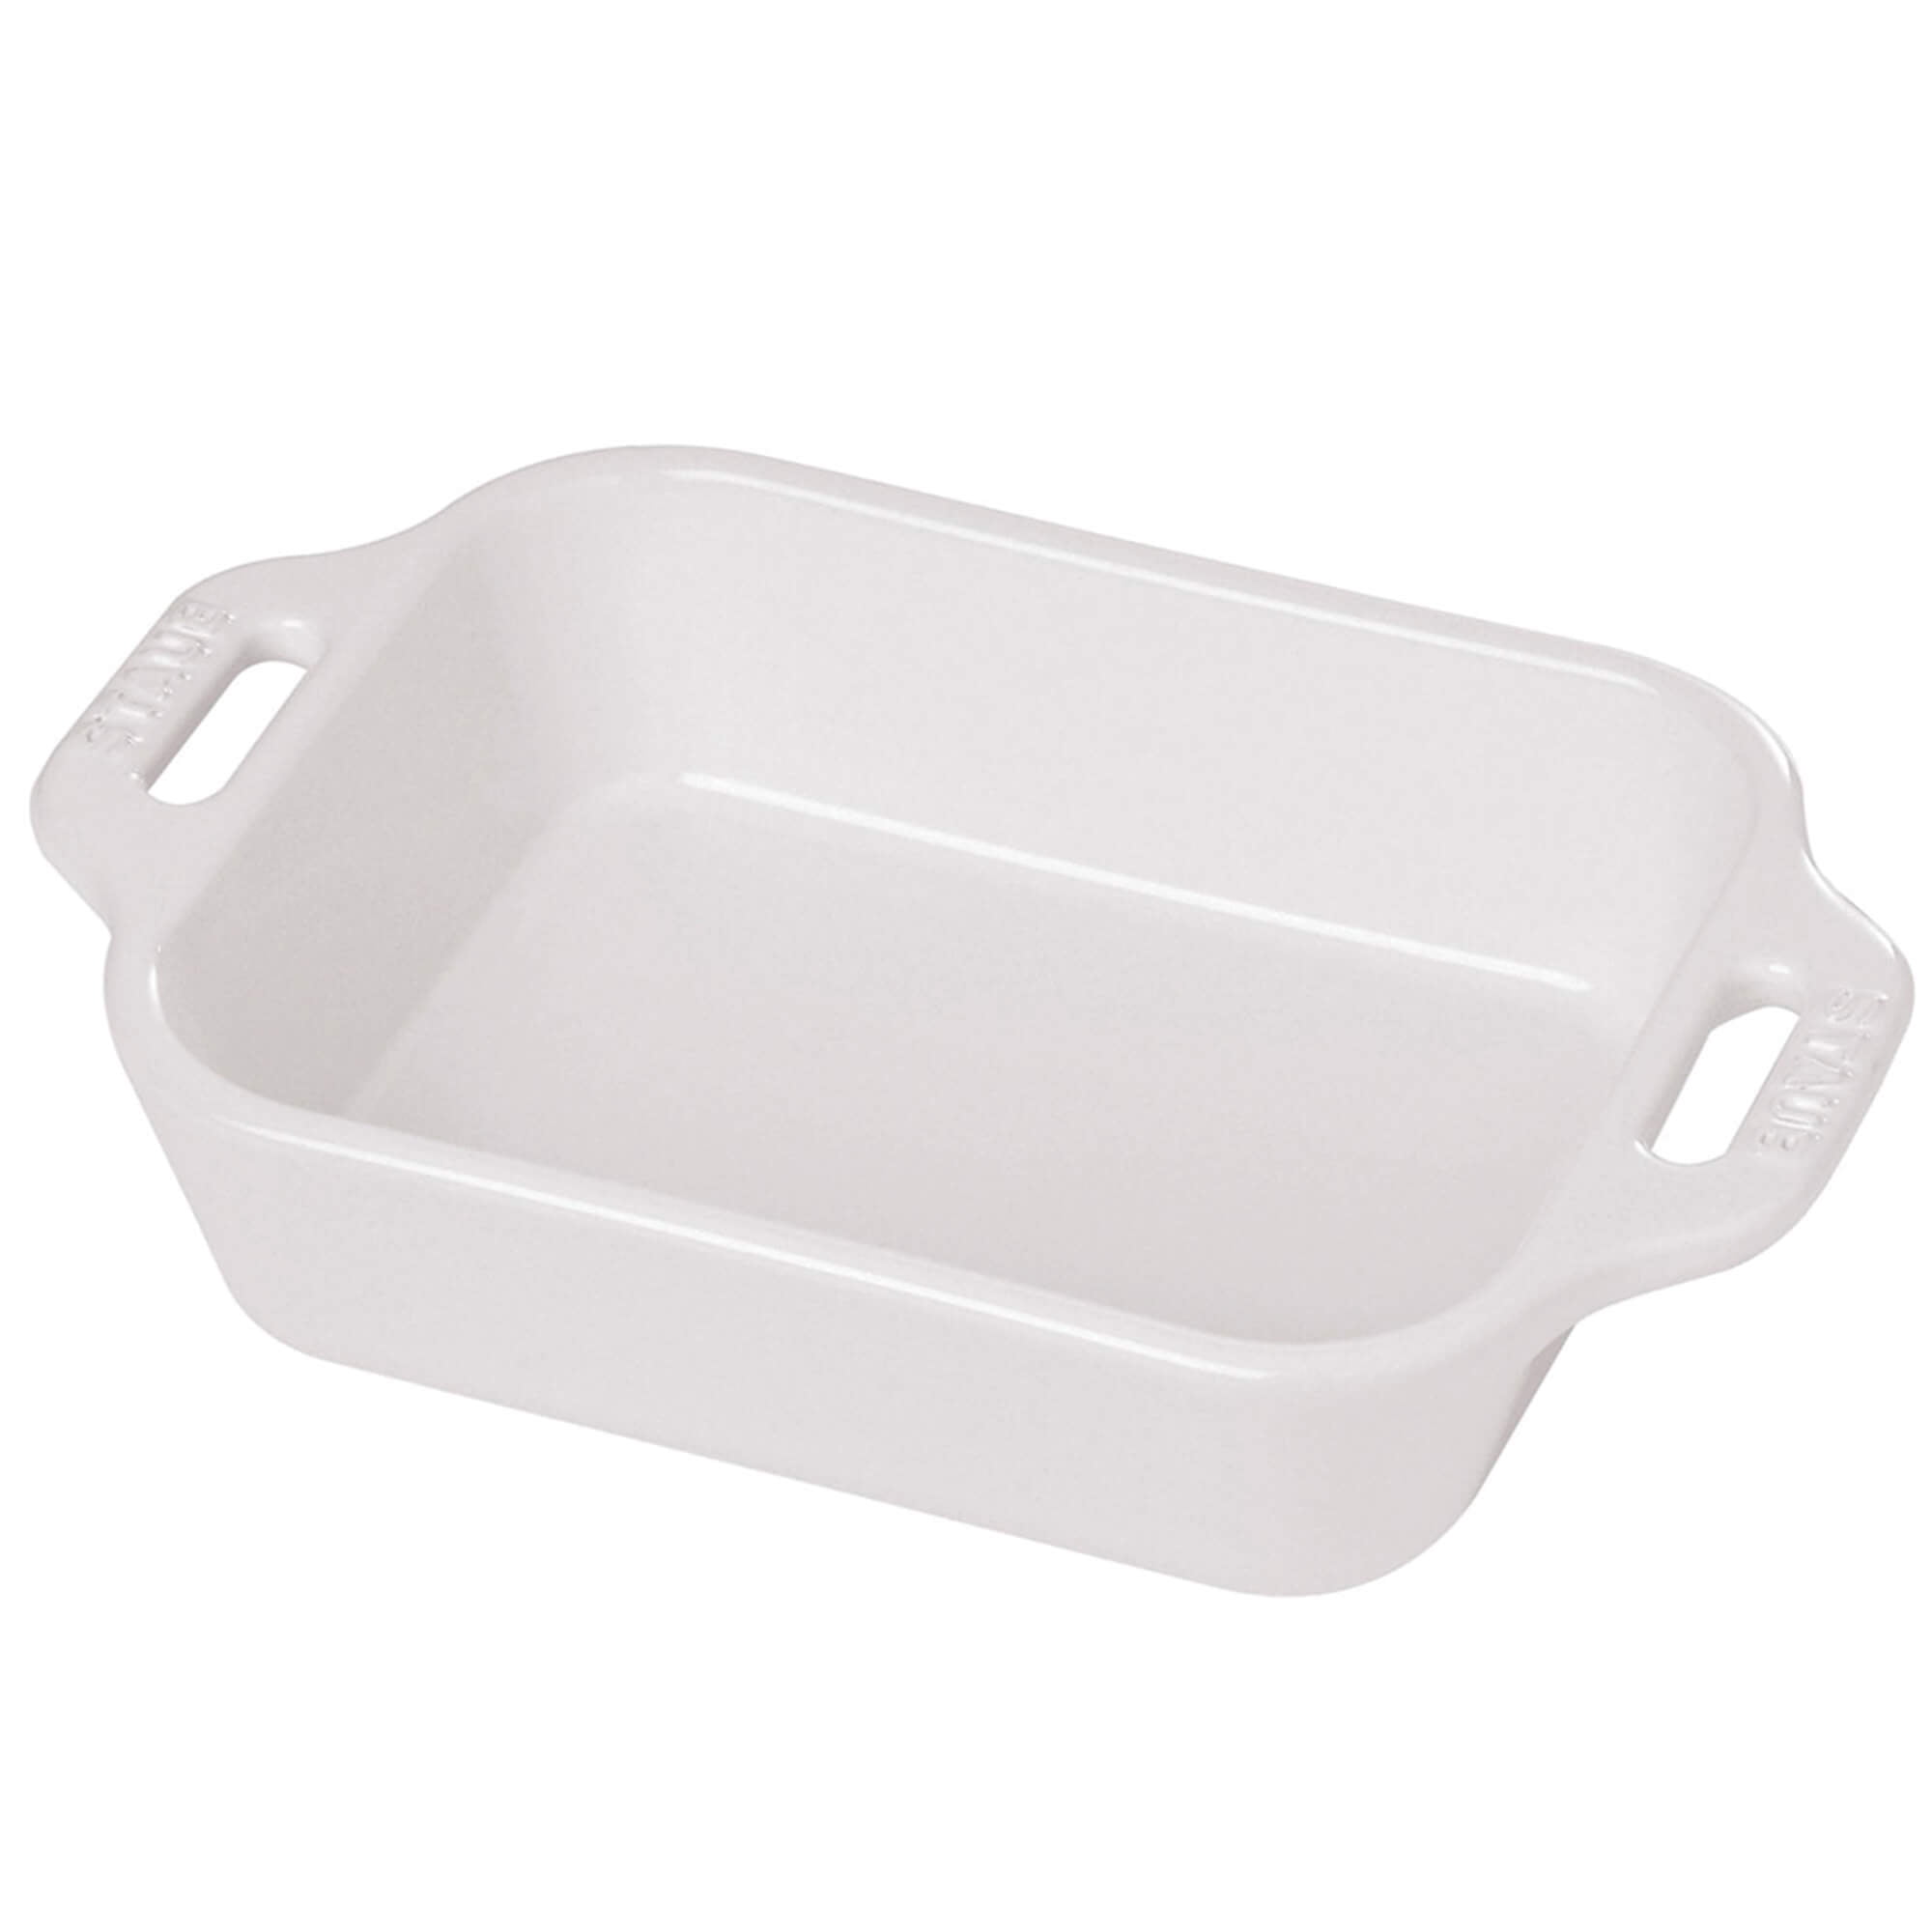 Staub Loaf Baking Dish with Lid and Tray (10 x 4.5 inches0 Cherry